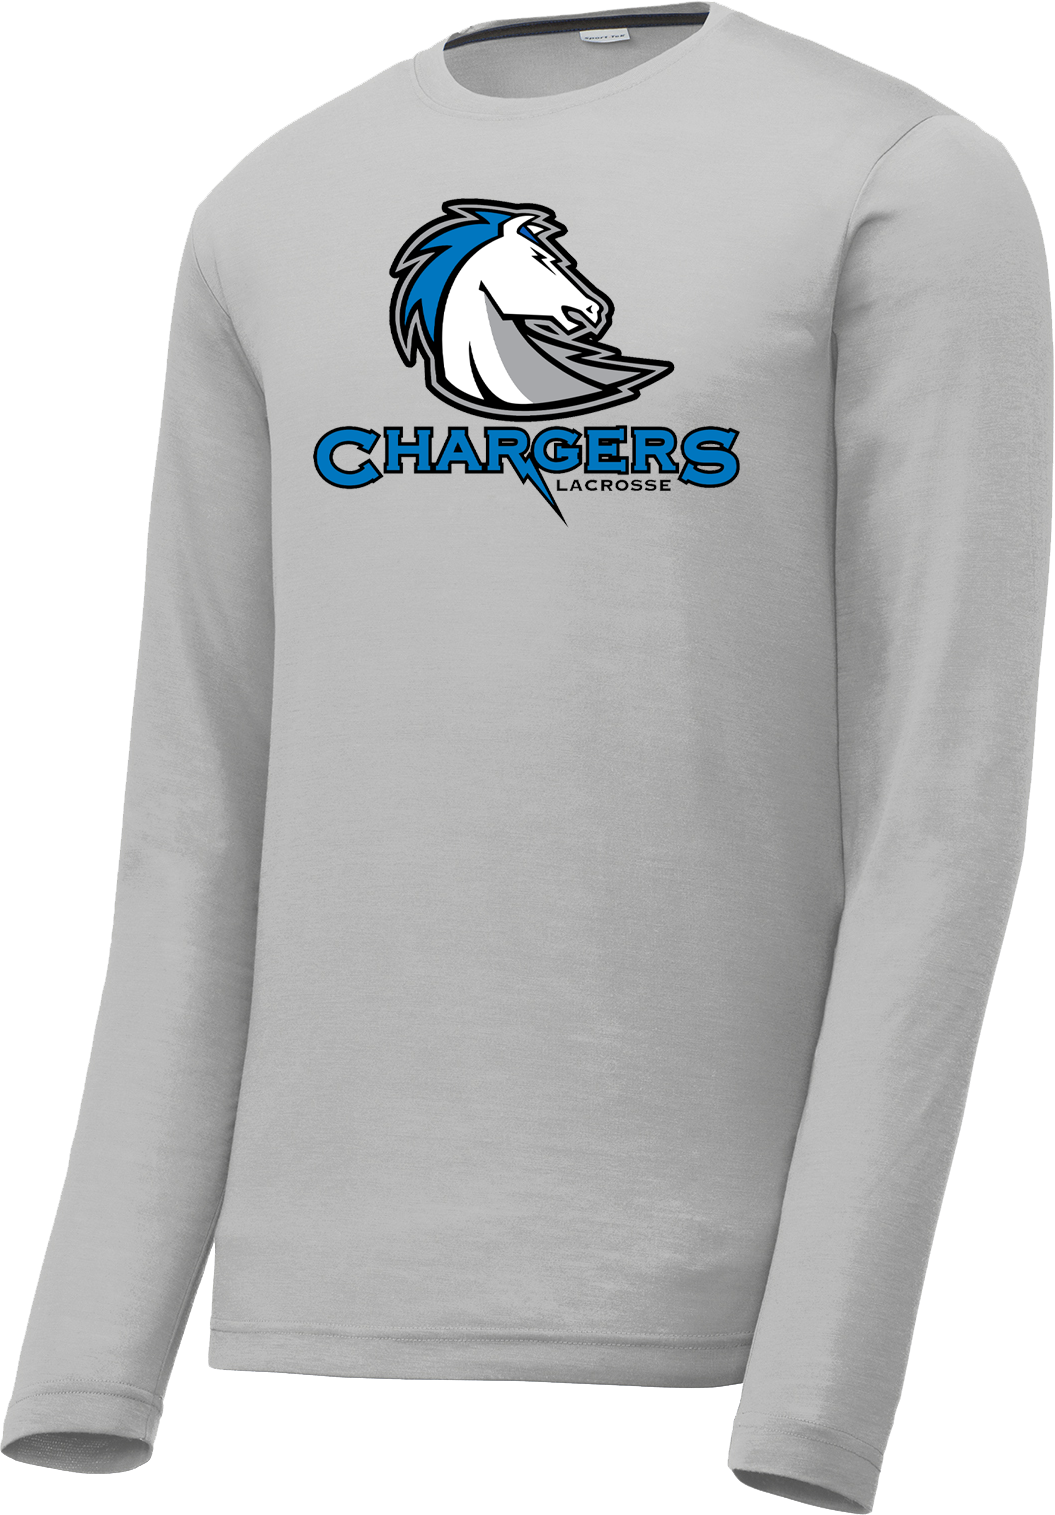 Clear Springs Lacrosse Long Sleeve CottonTouch Performance Shirt